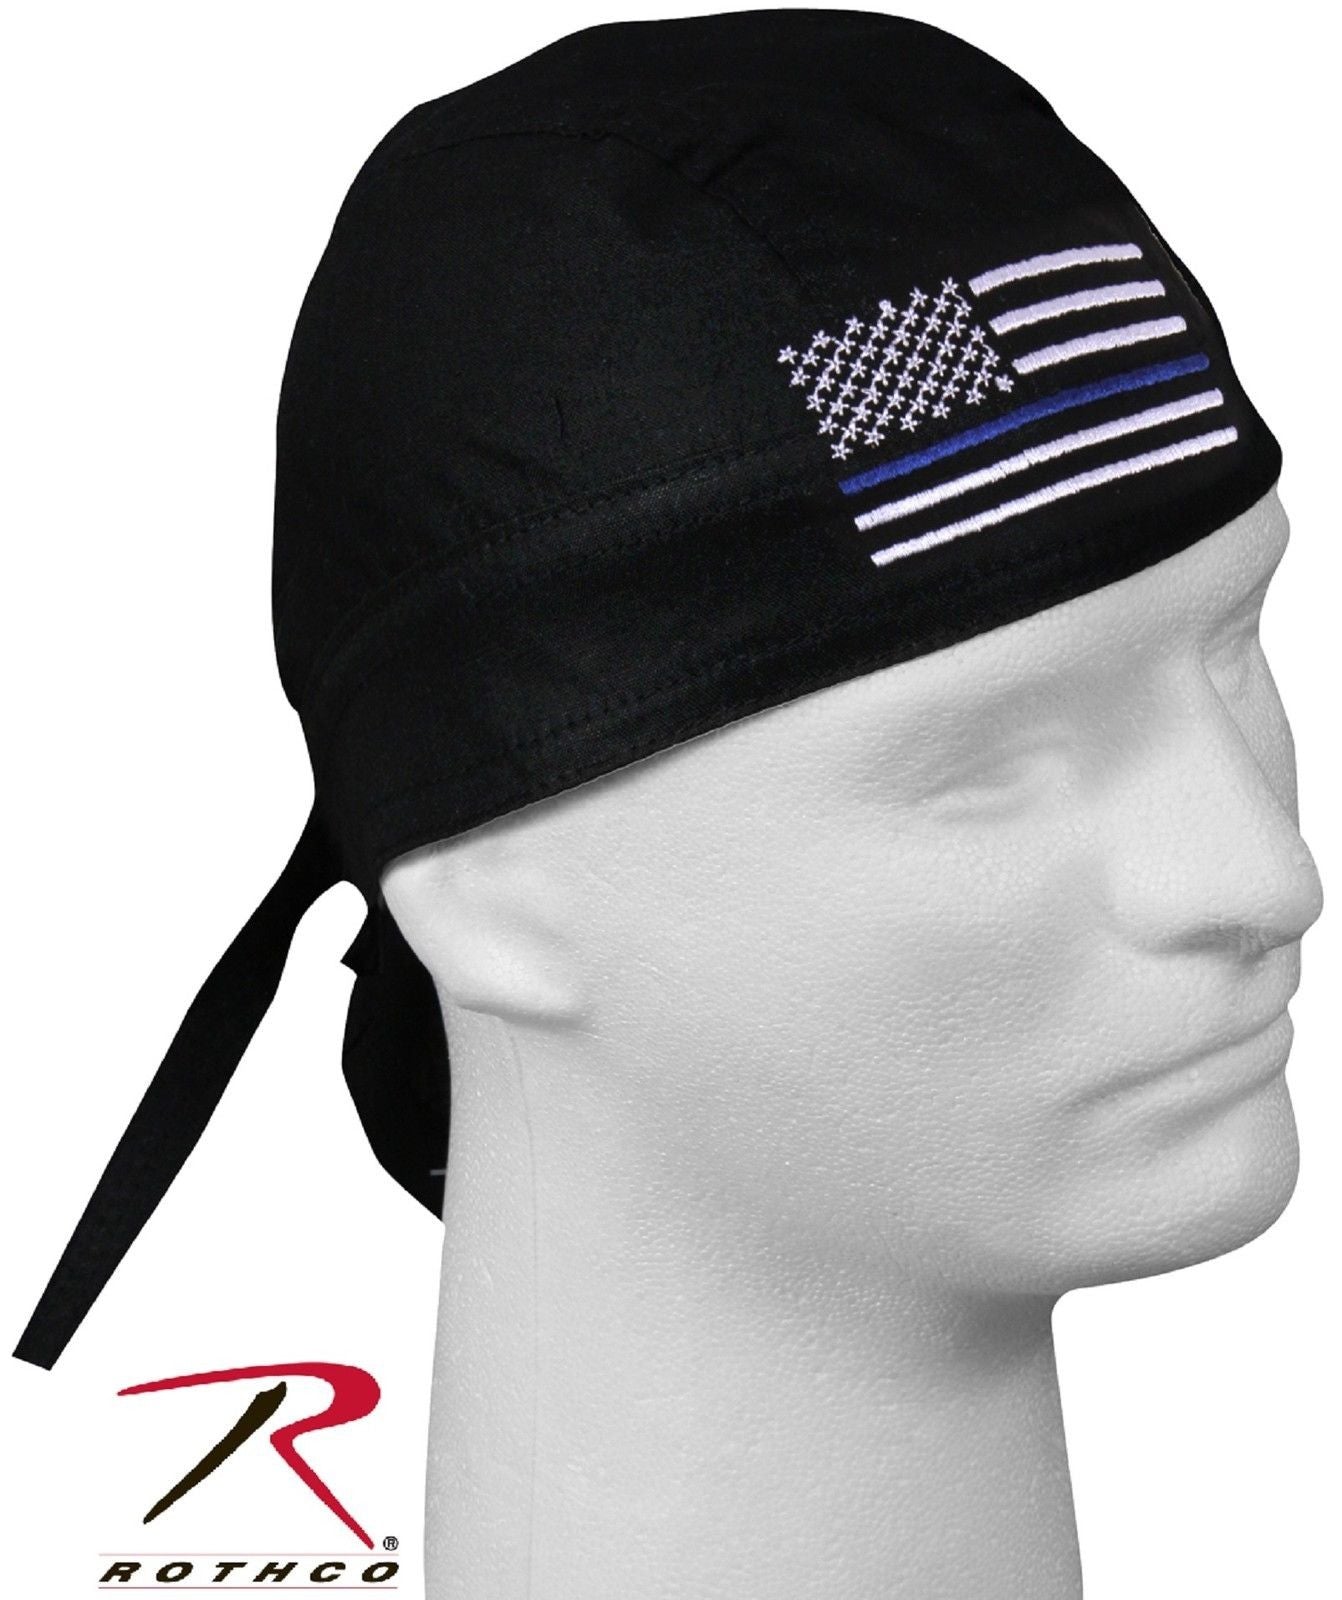 Rothco Thin Blue Line Police Support Headwrap - Mens Black TBL Cotton Head Wrap